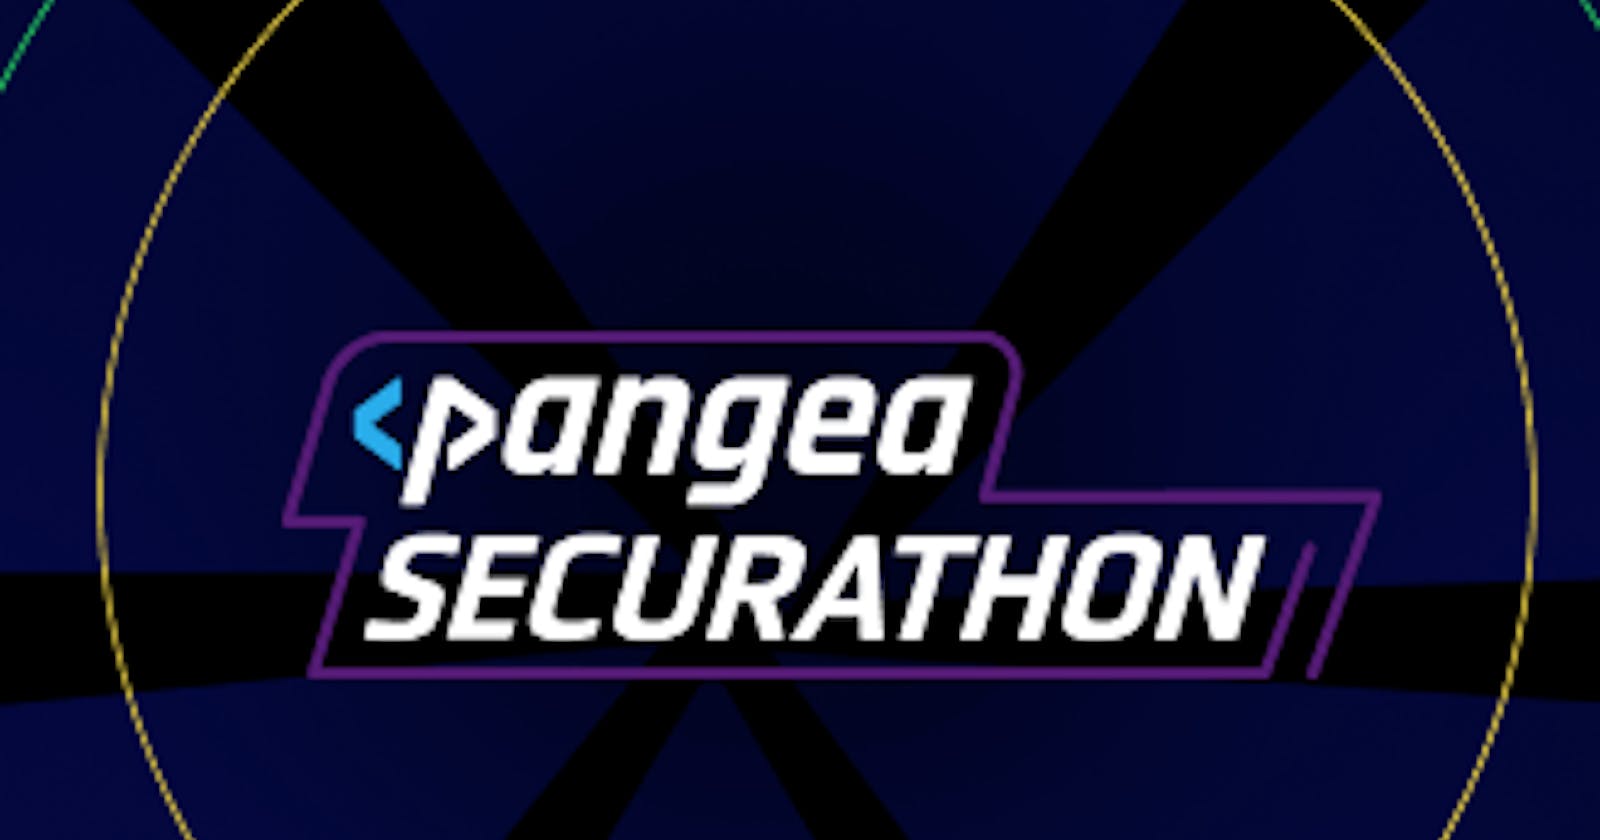 Building for Cybersecurity: A Deep Dive into Our Pangea Securathon Project